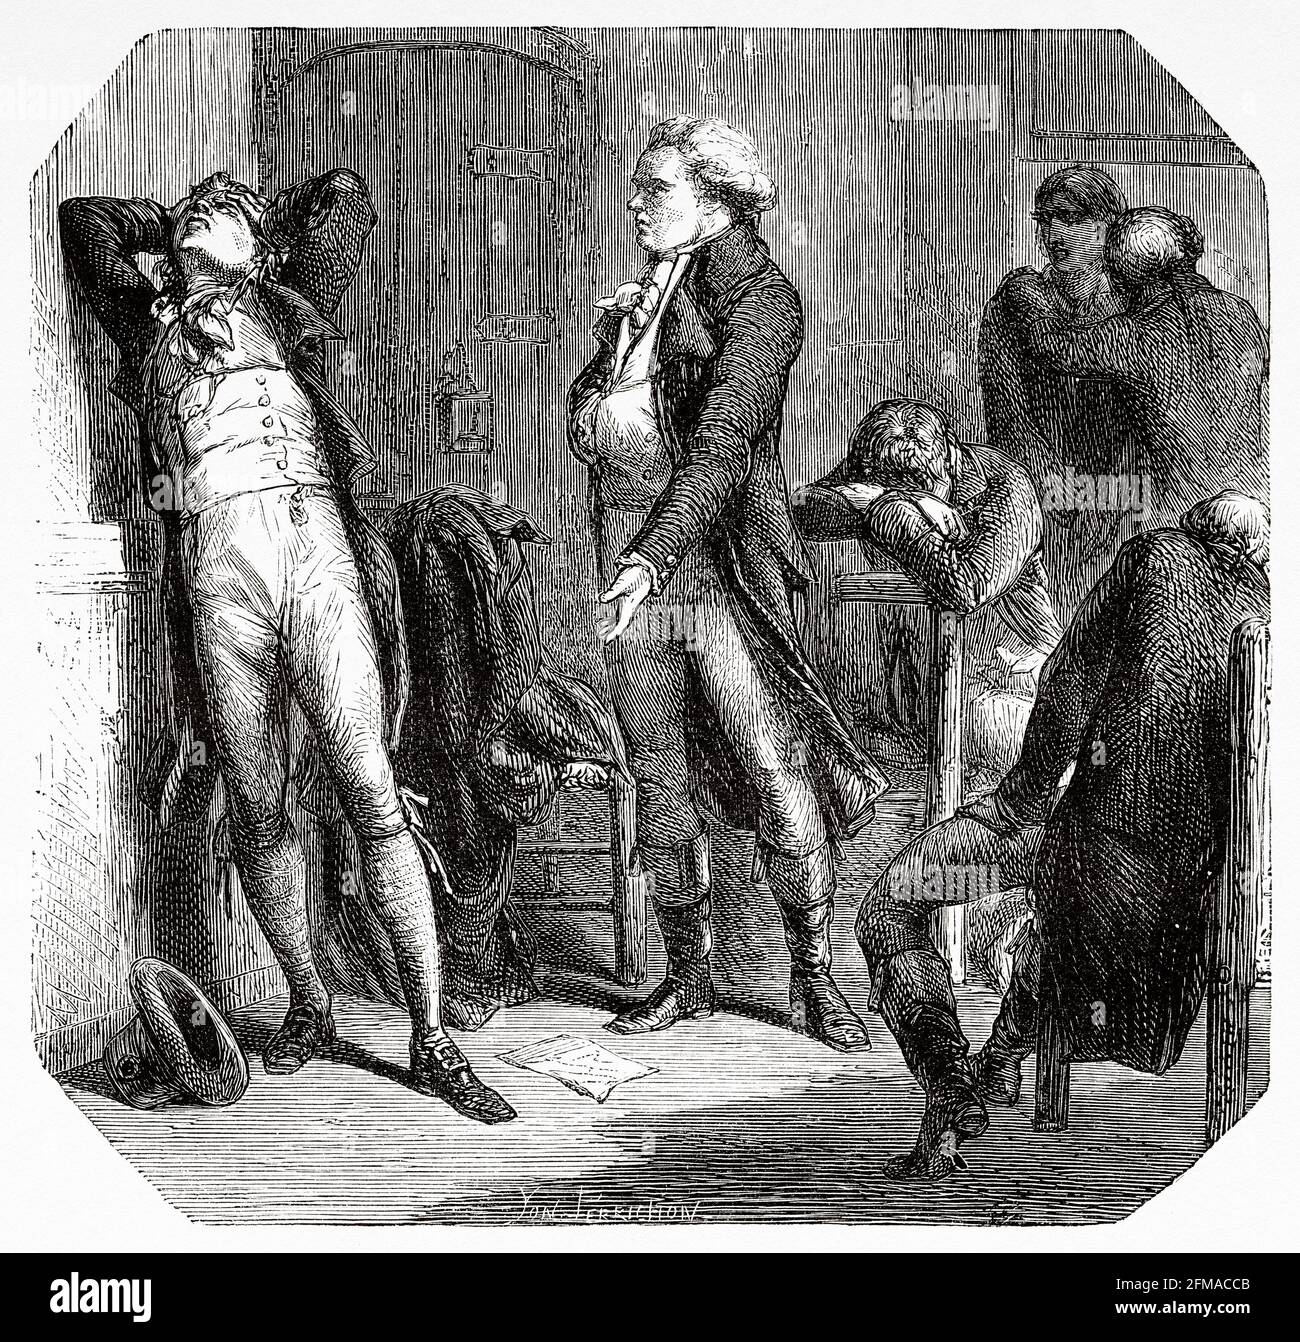 Georges Danton and Camille Desmoulins detained prisoners in the Luxembourg prison. France. Old 19th century engraved illustration from Histoire de la Revolution Francaise 1876 by Jules Michelet (1798-1874) Stock Photo